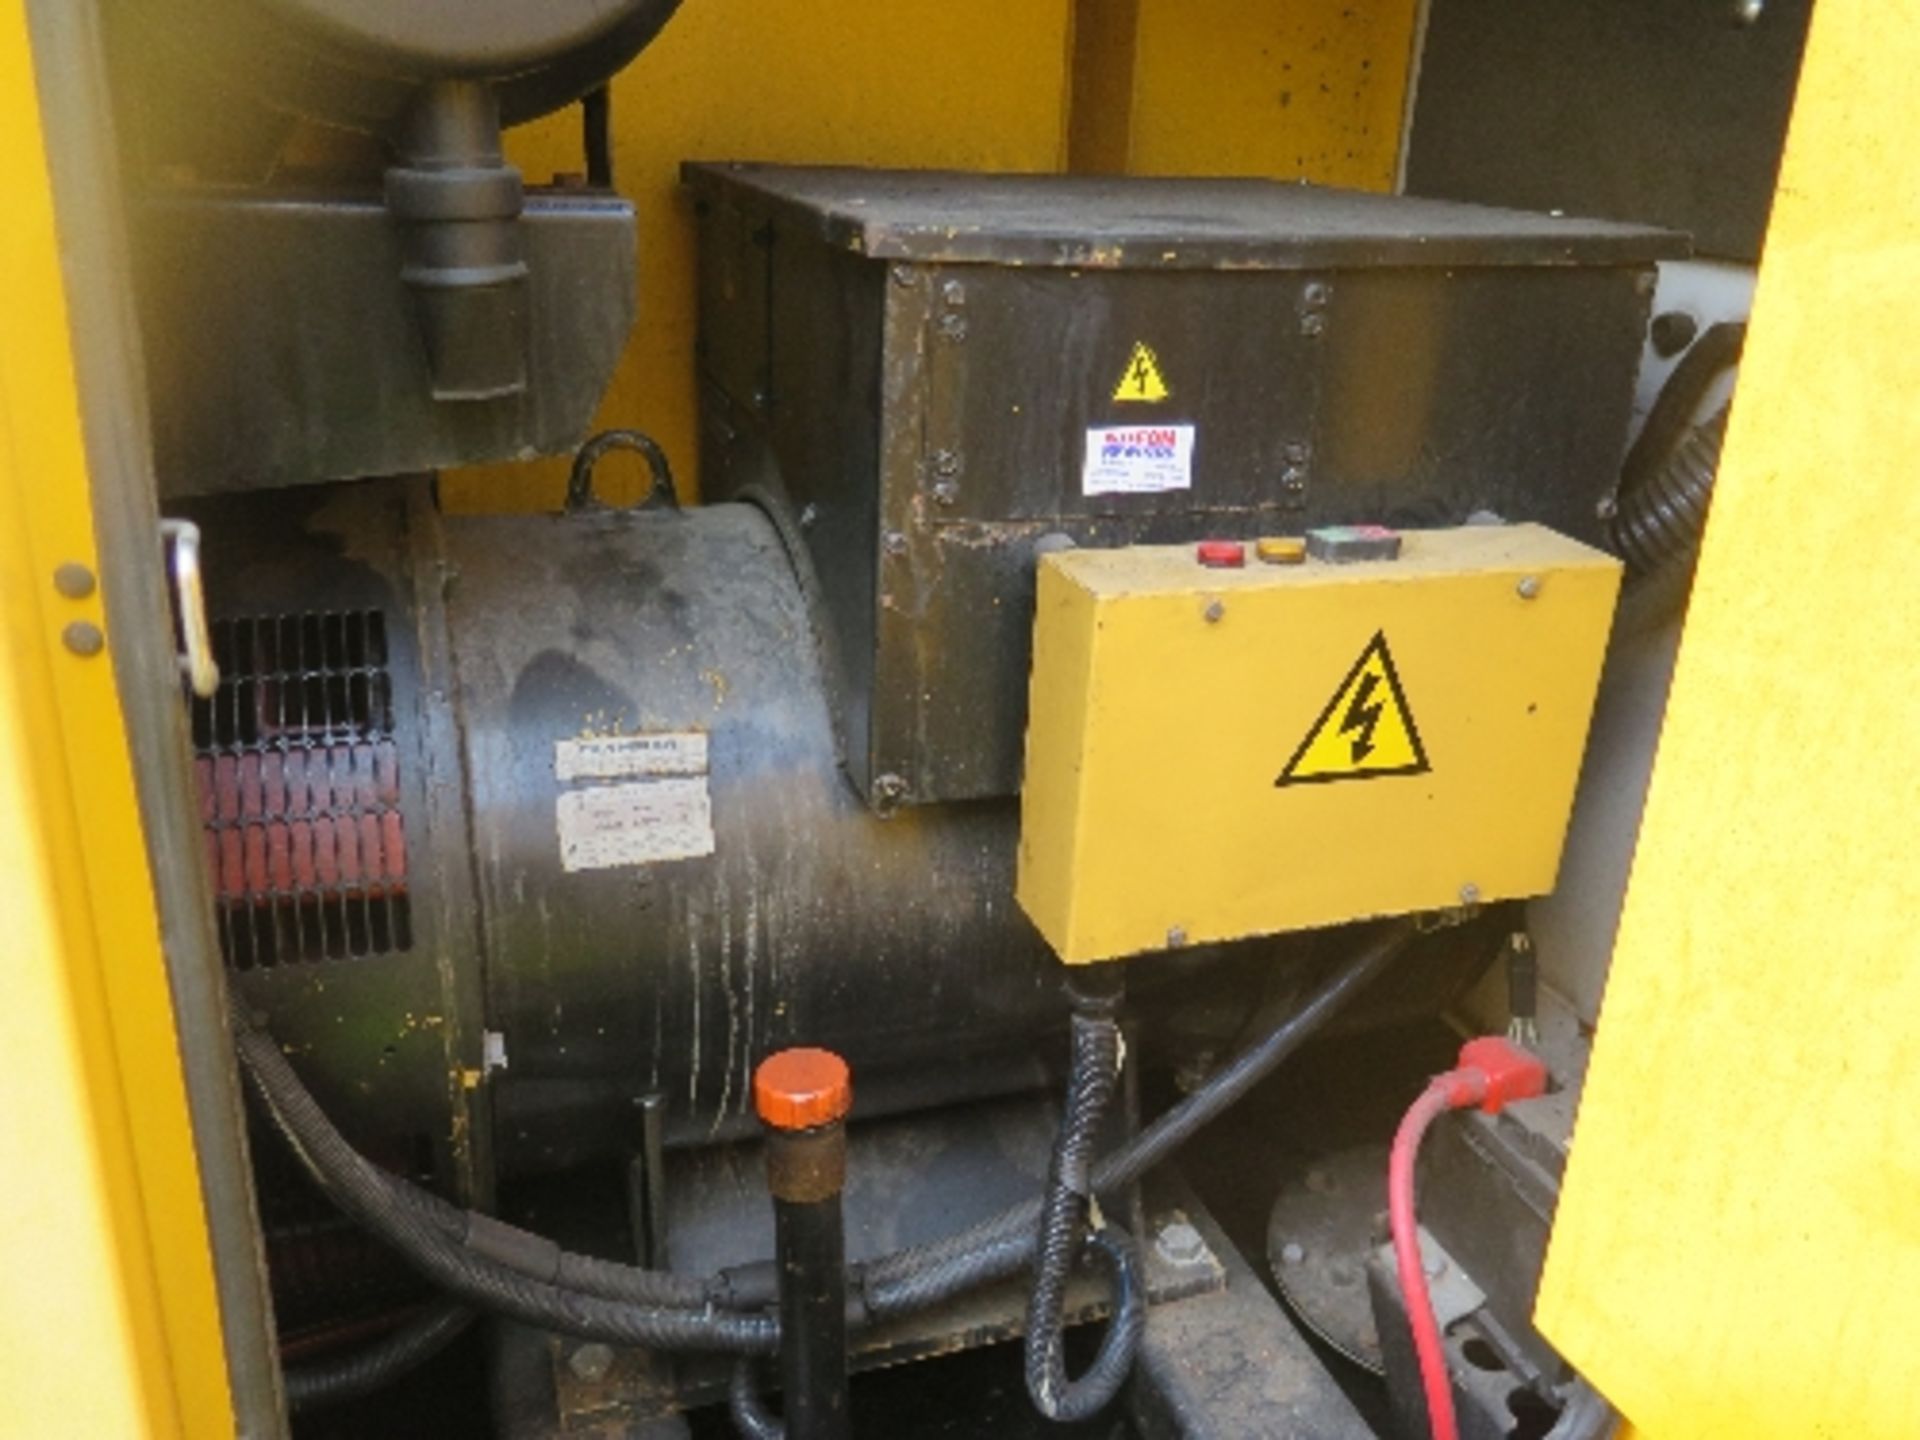 Caterpillar XQE200 generator 22896 hrs 157829
PERKINS - RUNS AND MAKES POWER
ALL LOTS are SOLD - Image 4 of 7